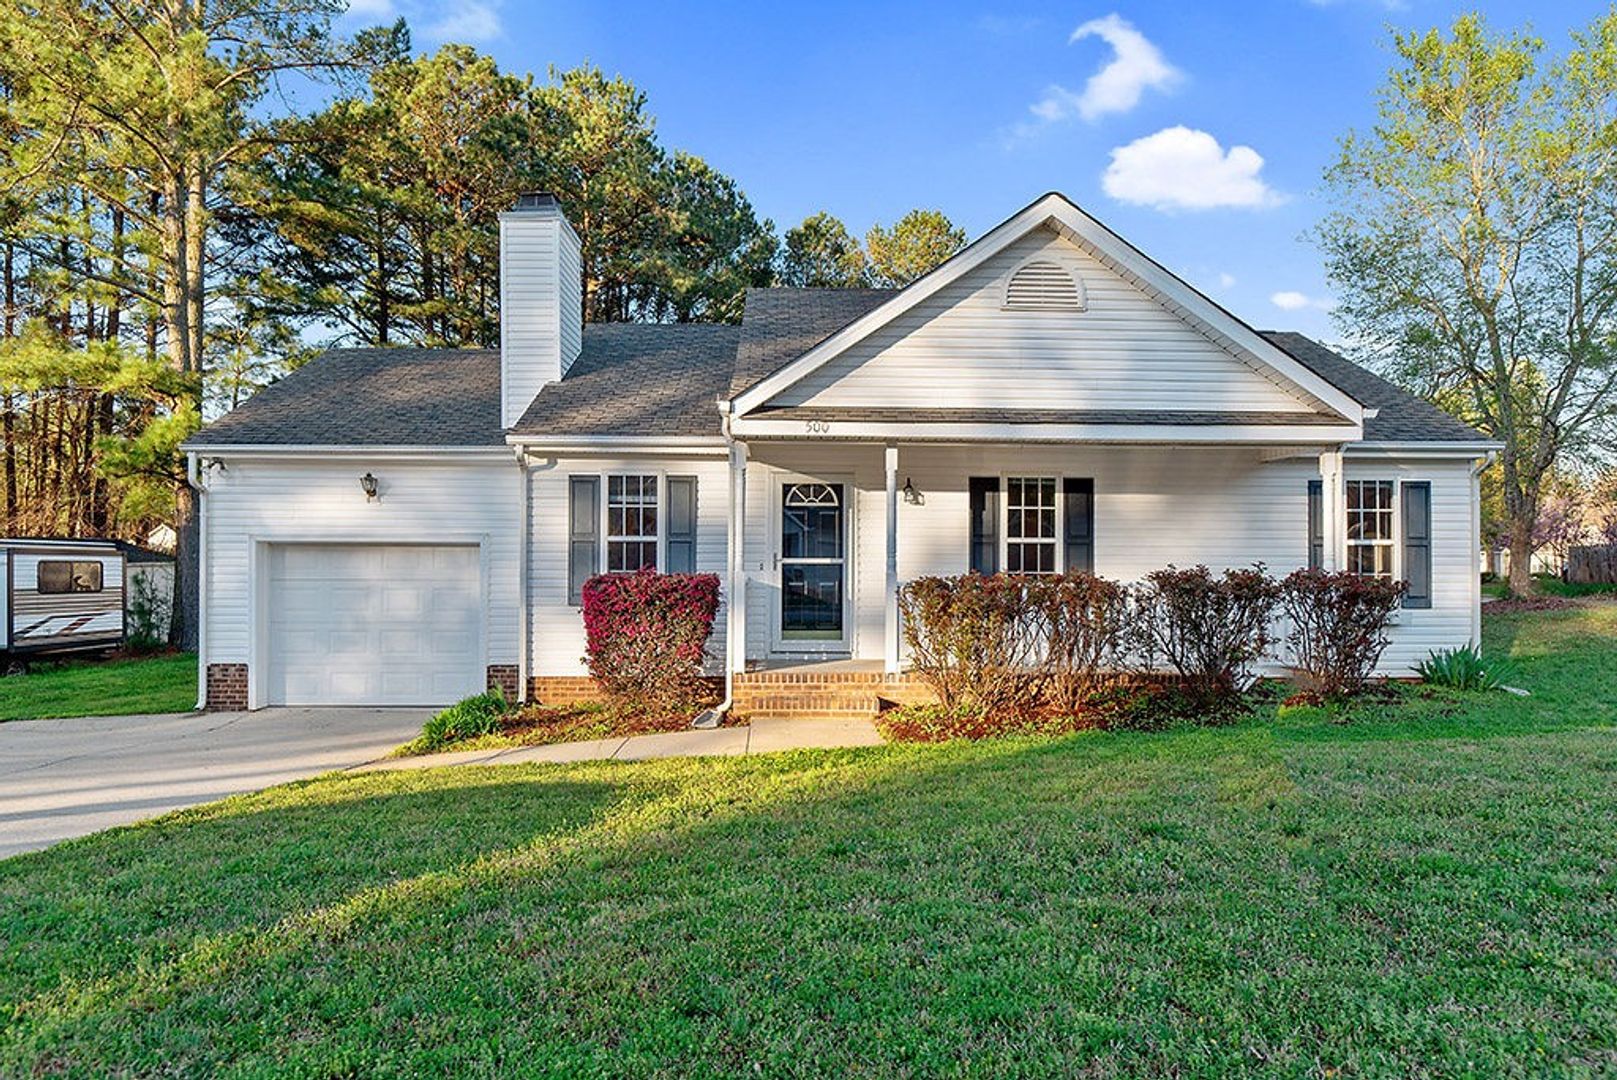 Single-level home with 1 Car Garage in Flaherty Farms!